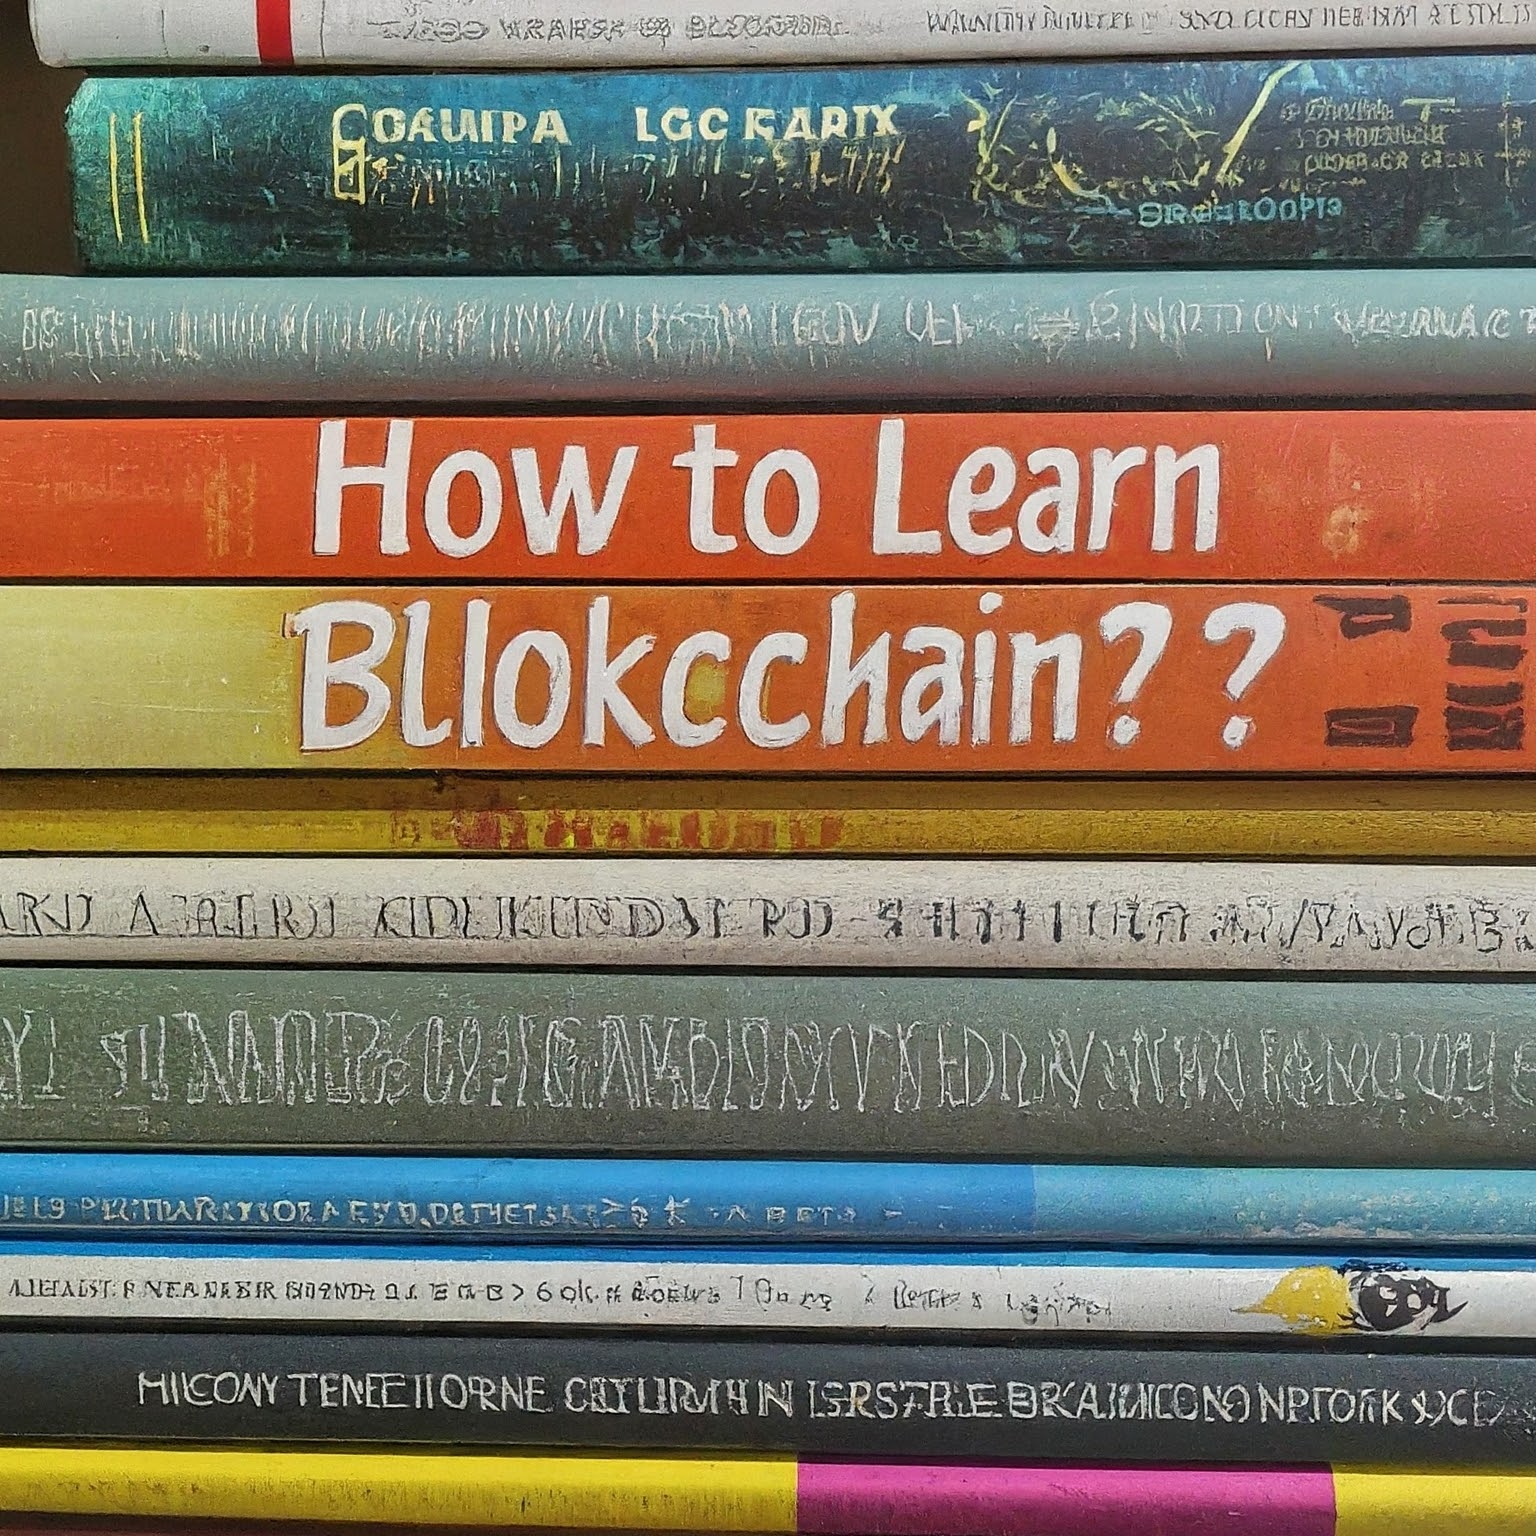 How to Learn Blockchain